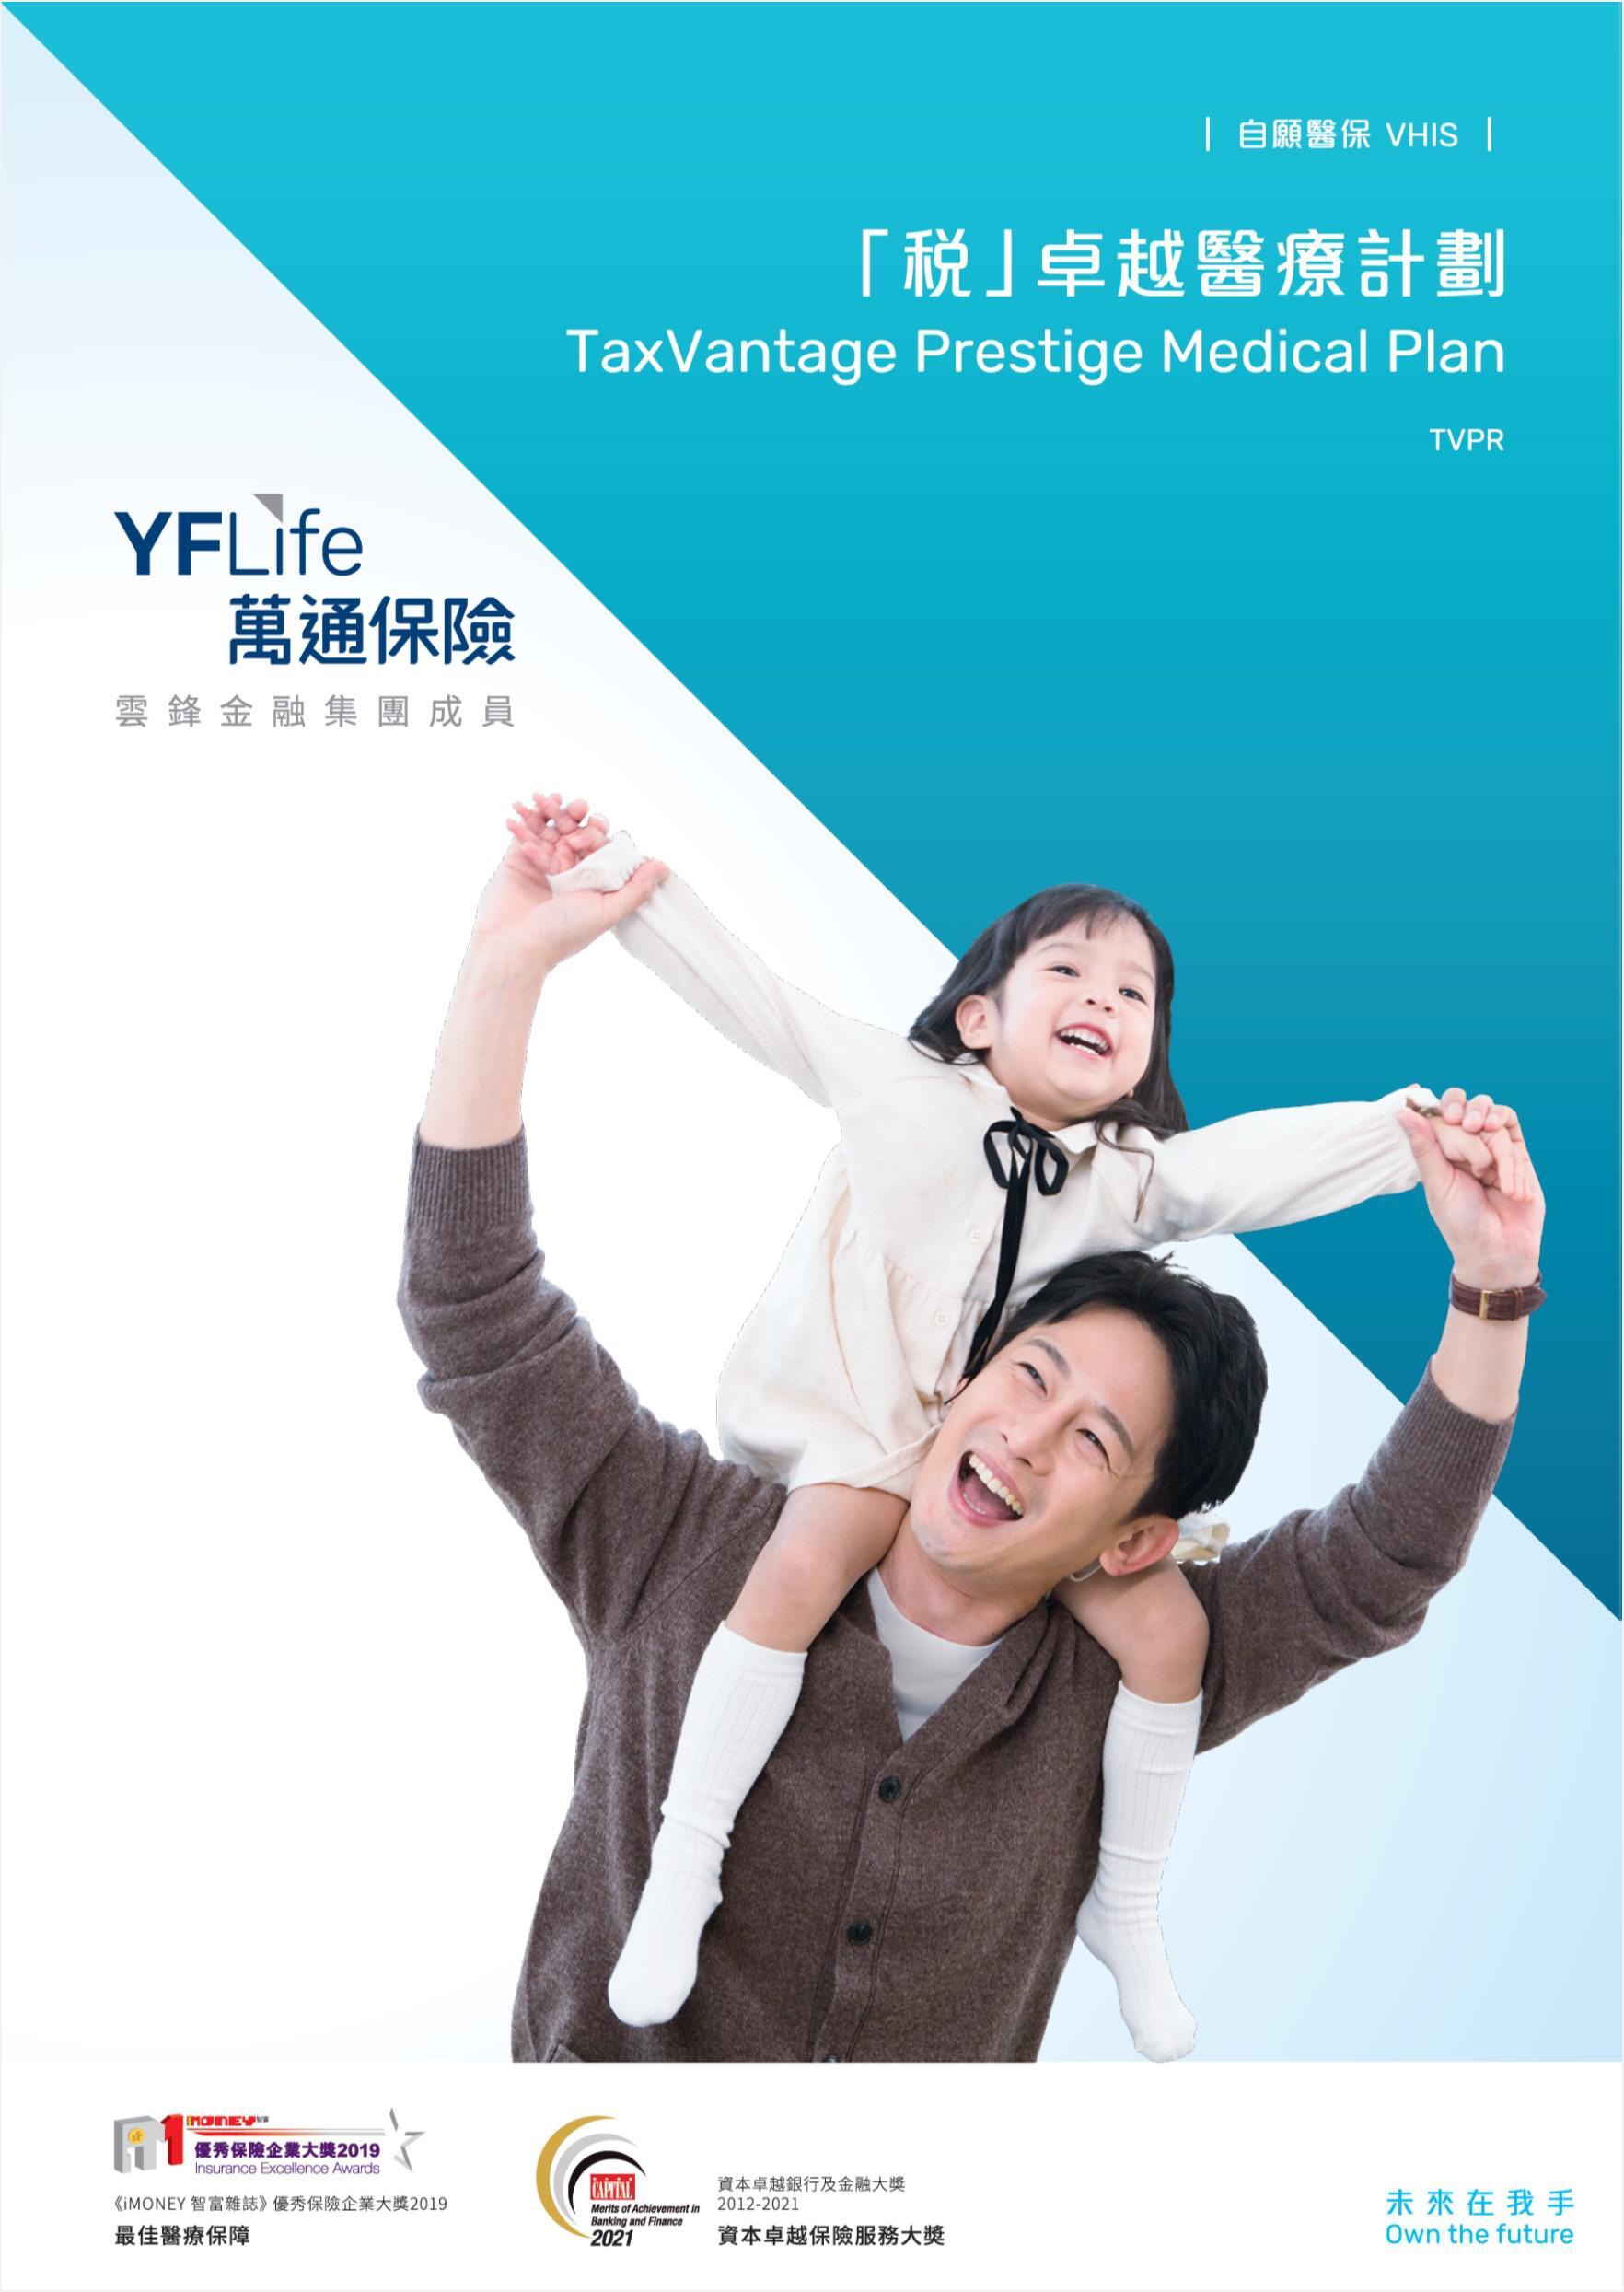 YF Life TaxVantage Prestige Medical Plan offers comprehensive and quality medical protection benefits